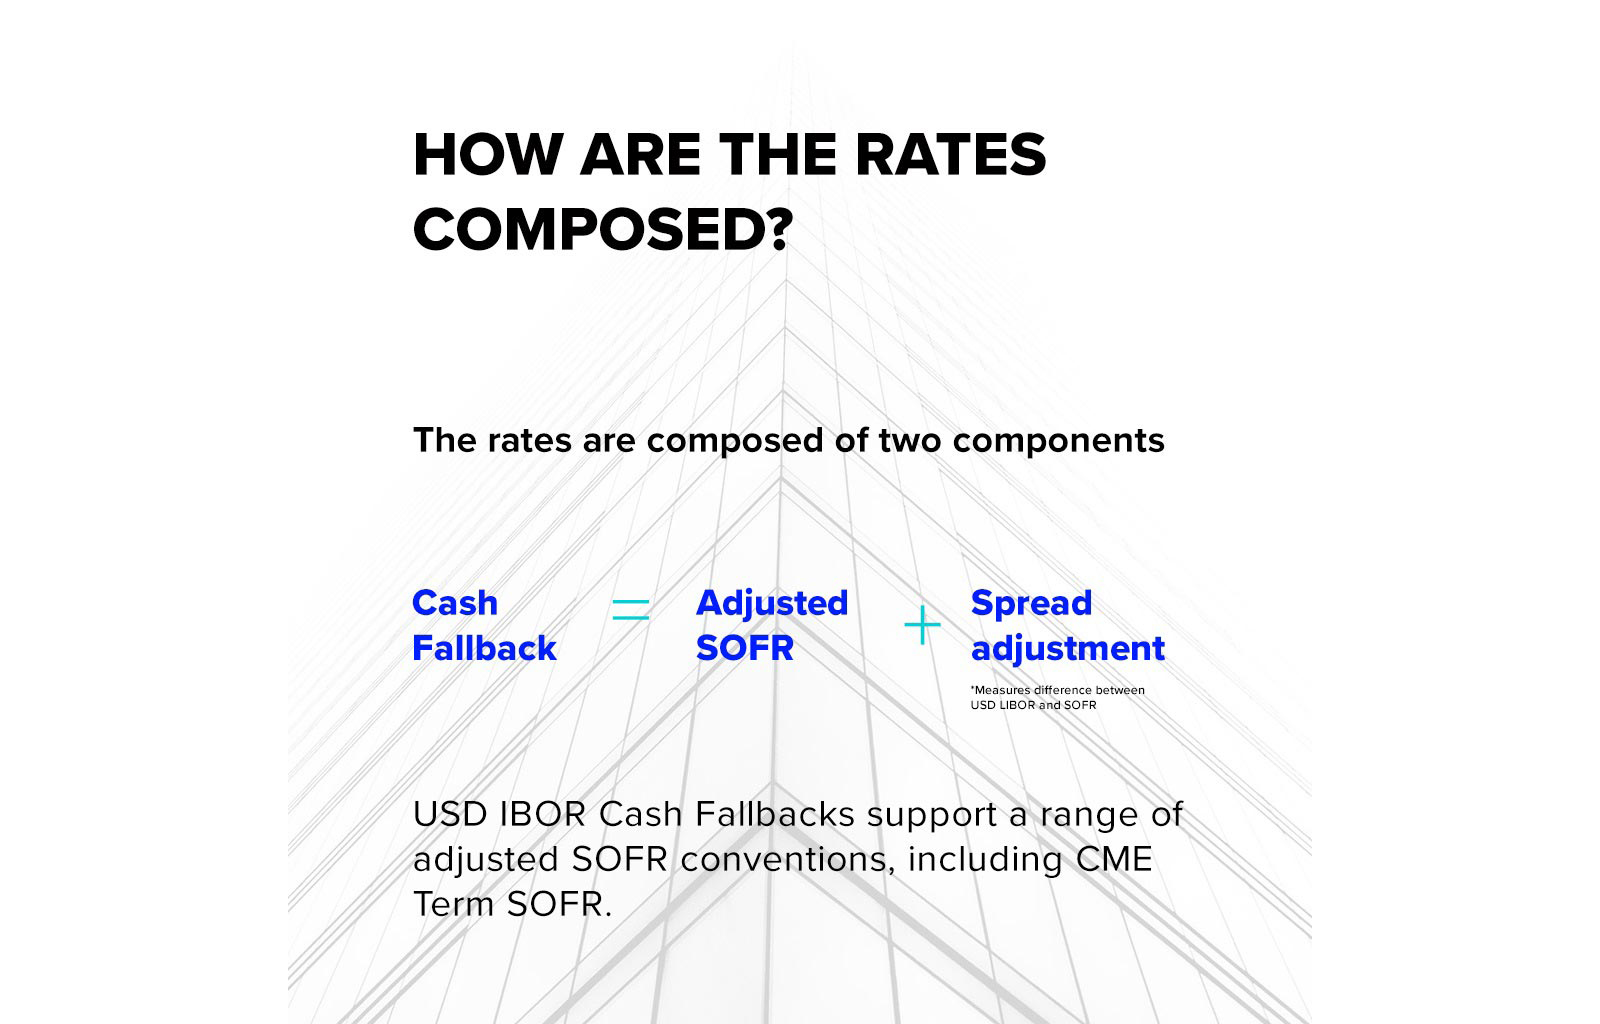 How are the rates composed?